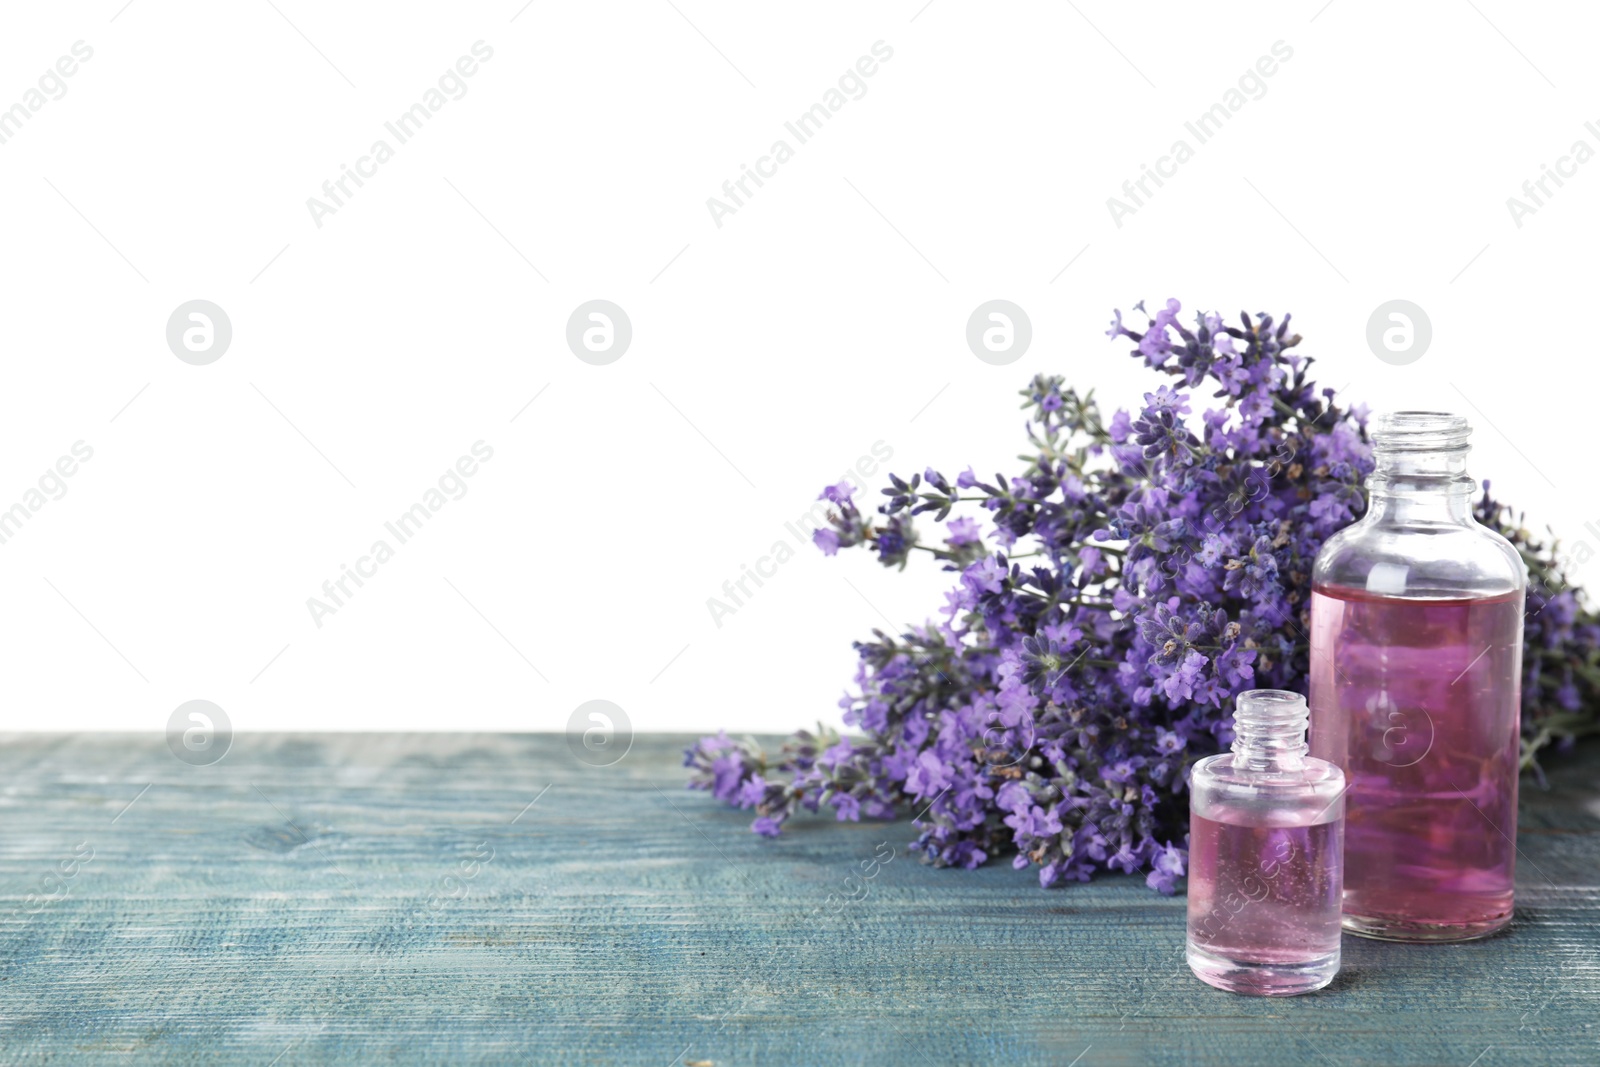 Photo of Bottles of essential oil and lavender flowers on blue wooden table against white background